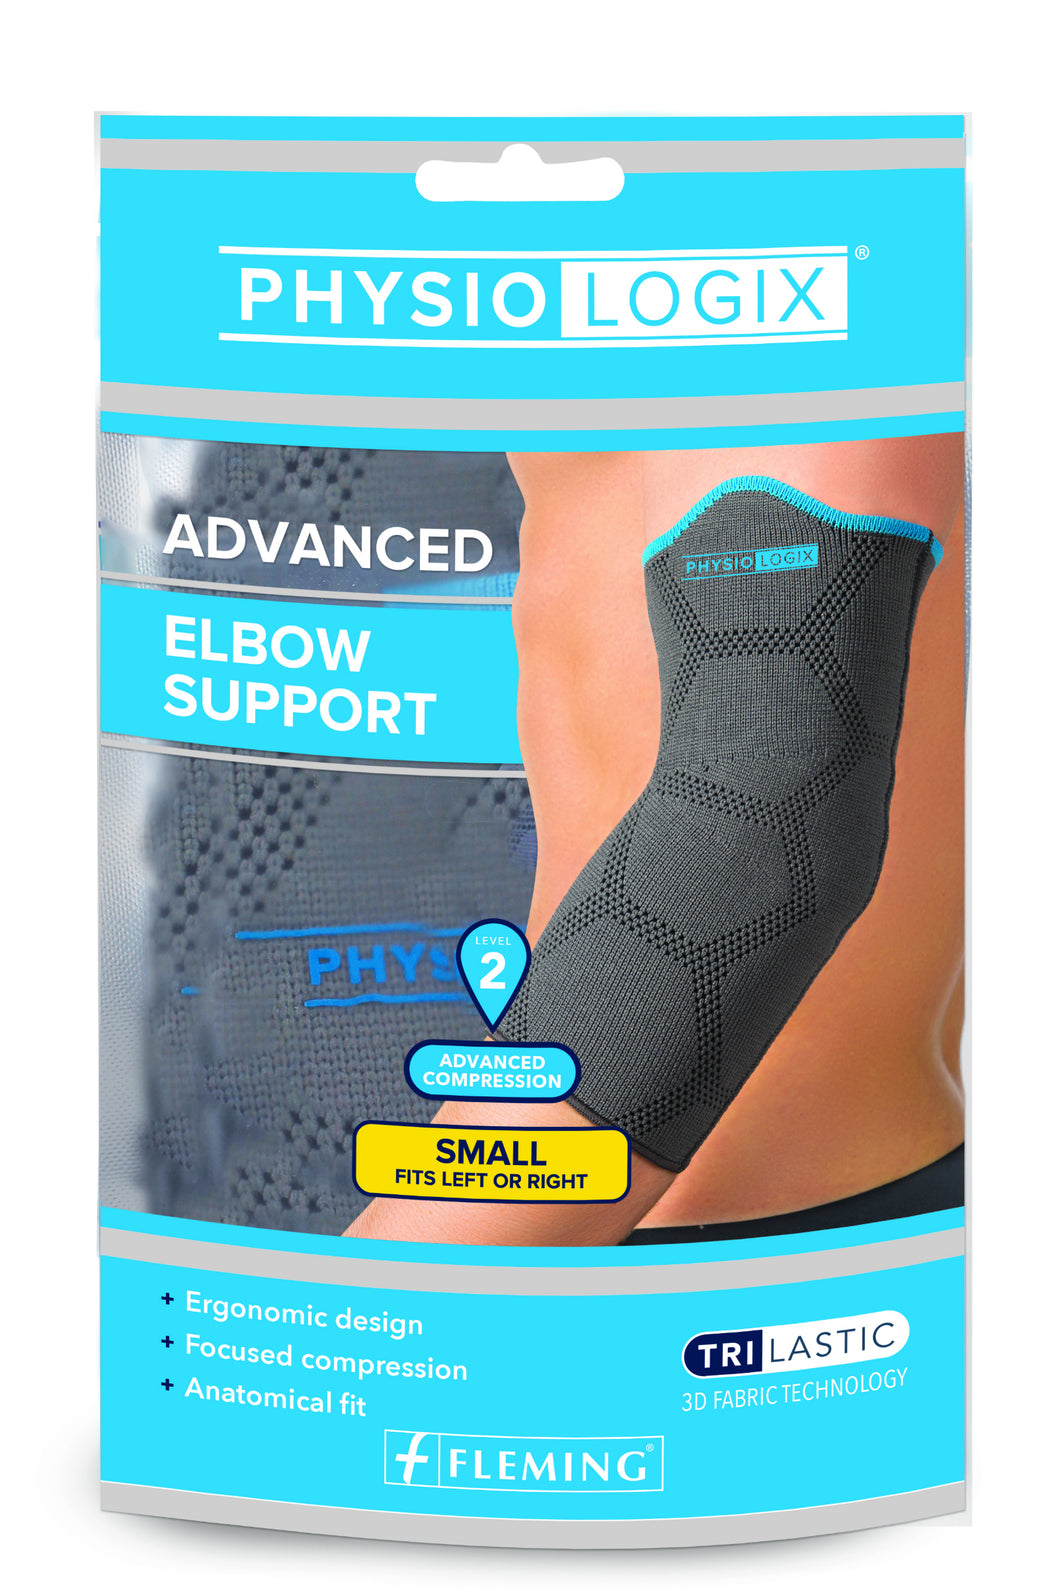 Physiologix ADVANCED ELBOW SUPPORT - Small